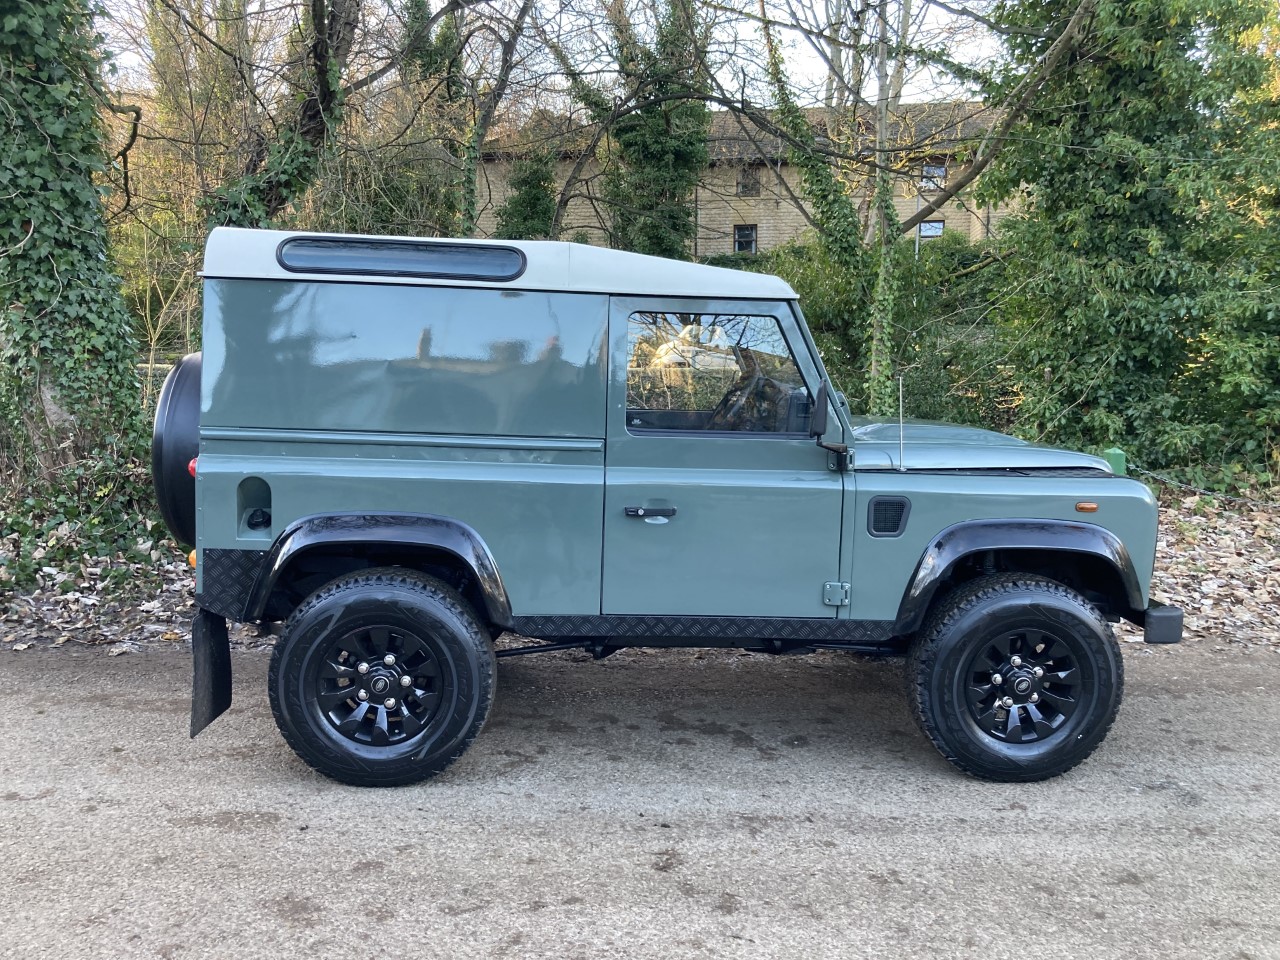 SW07 FBE – 2007 Land Rover Defender 90 – 2.4 TDci Hard Top – Low